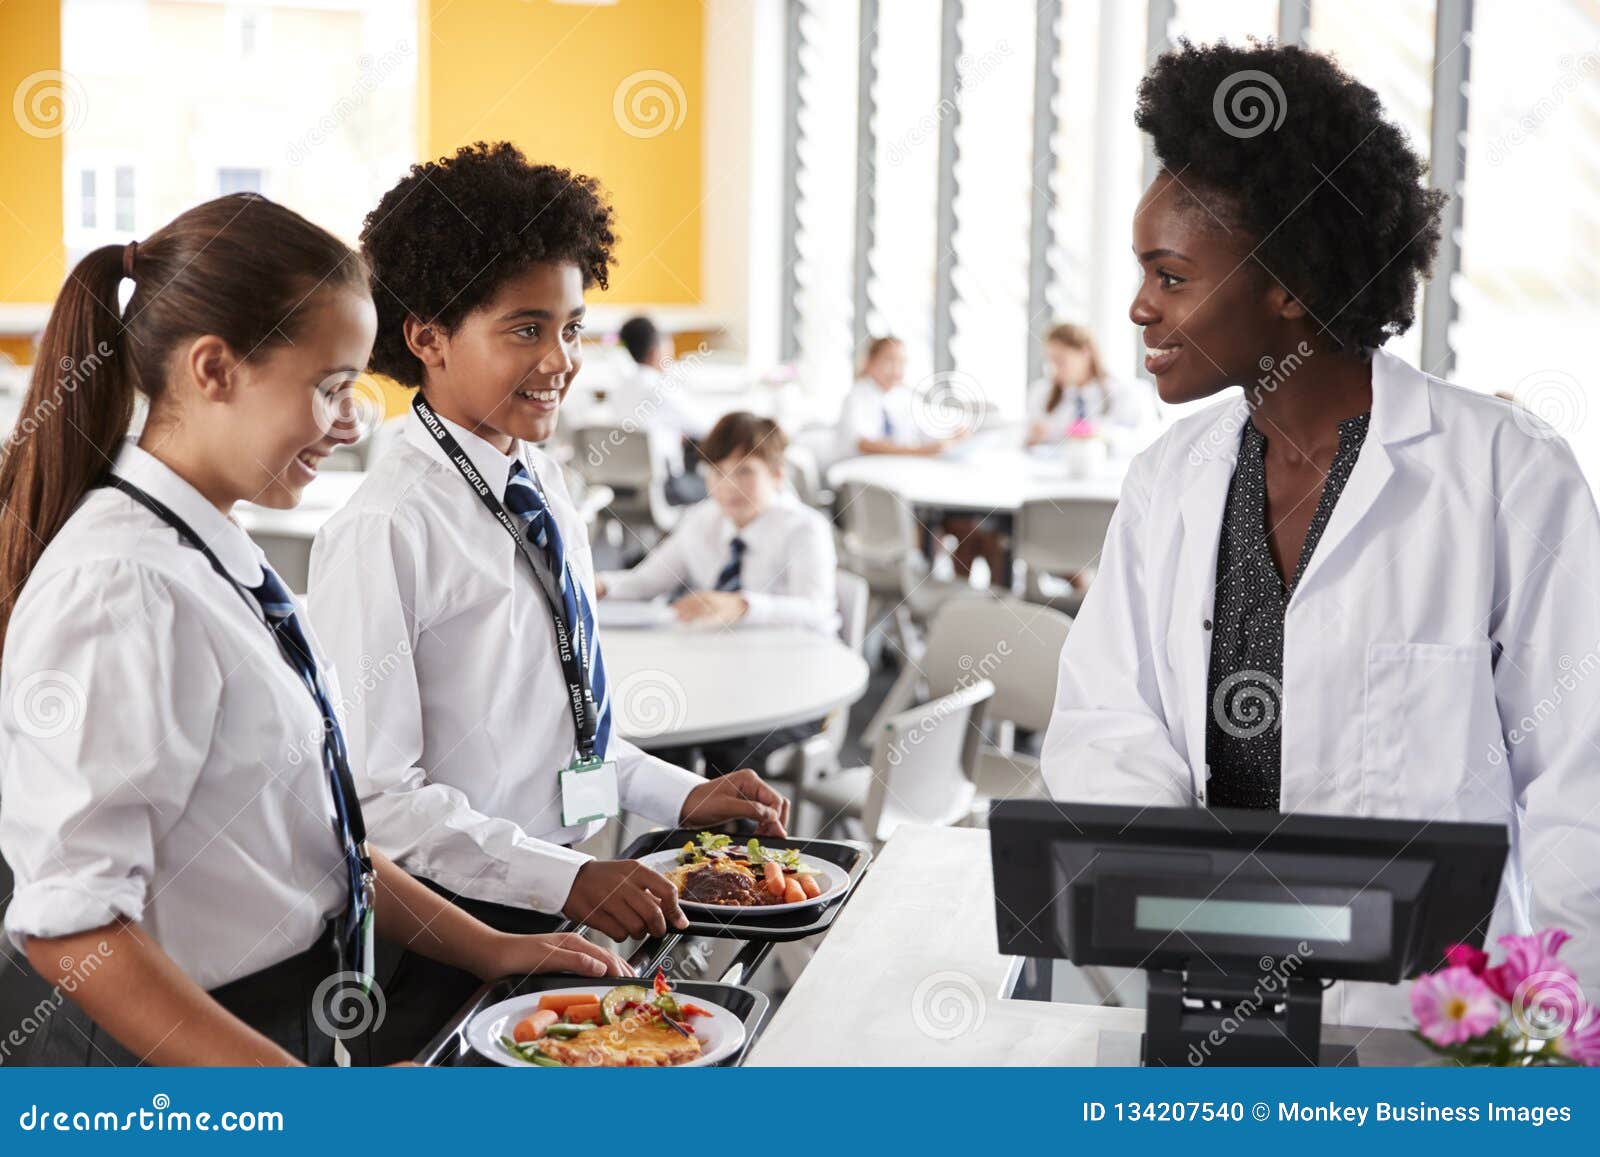 high school students wearing uniform paying for meal in cafeteria